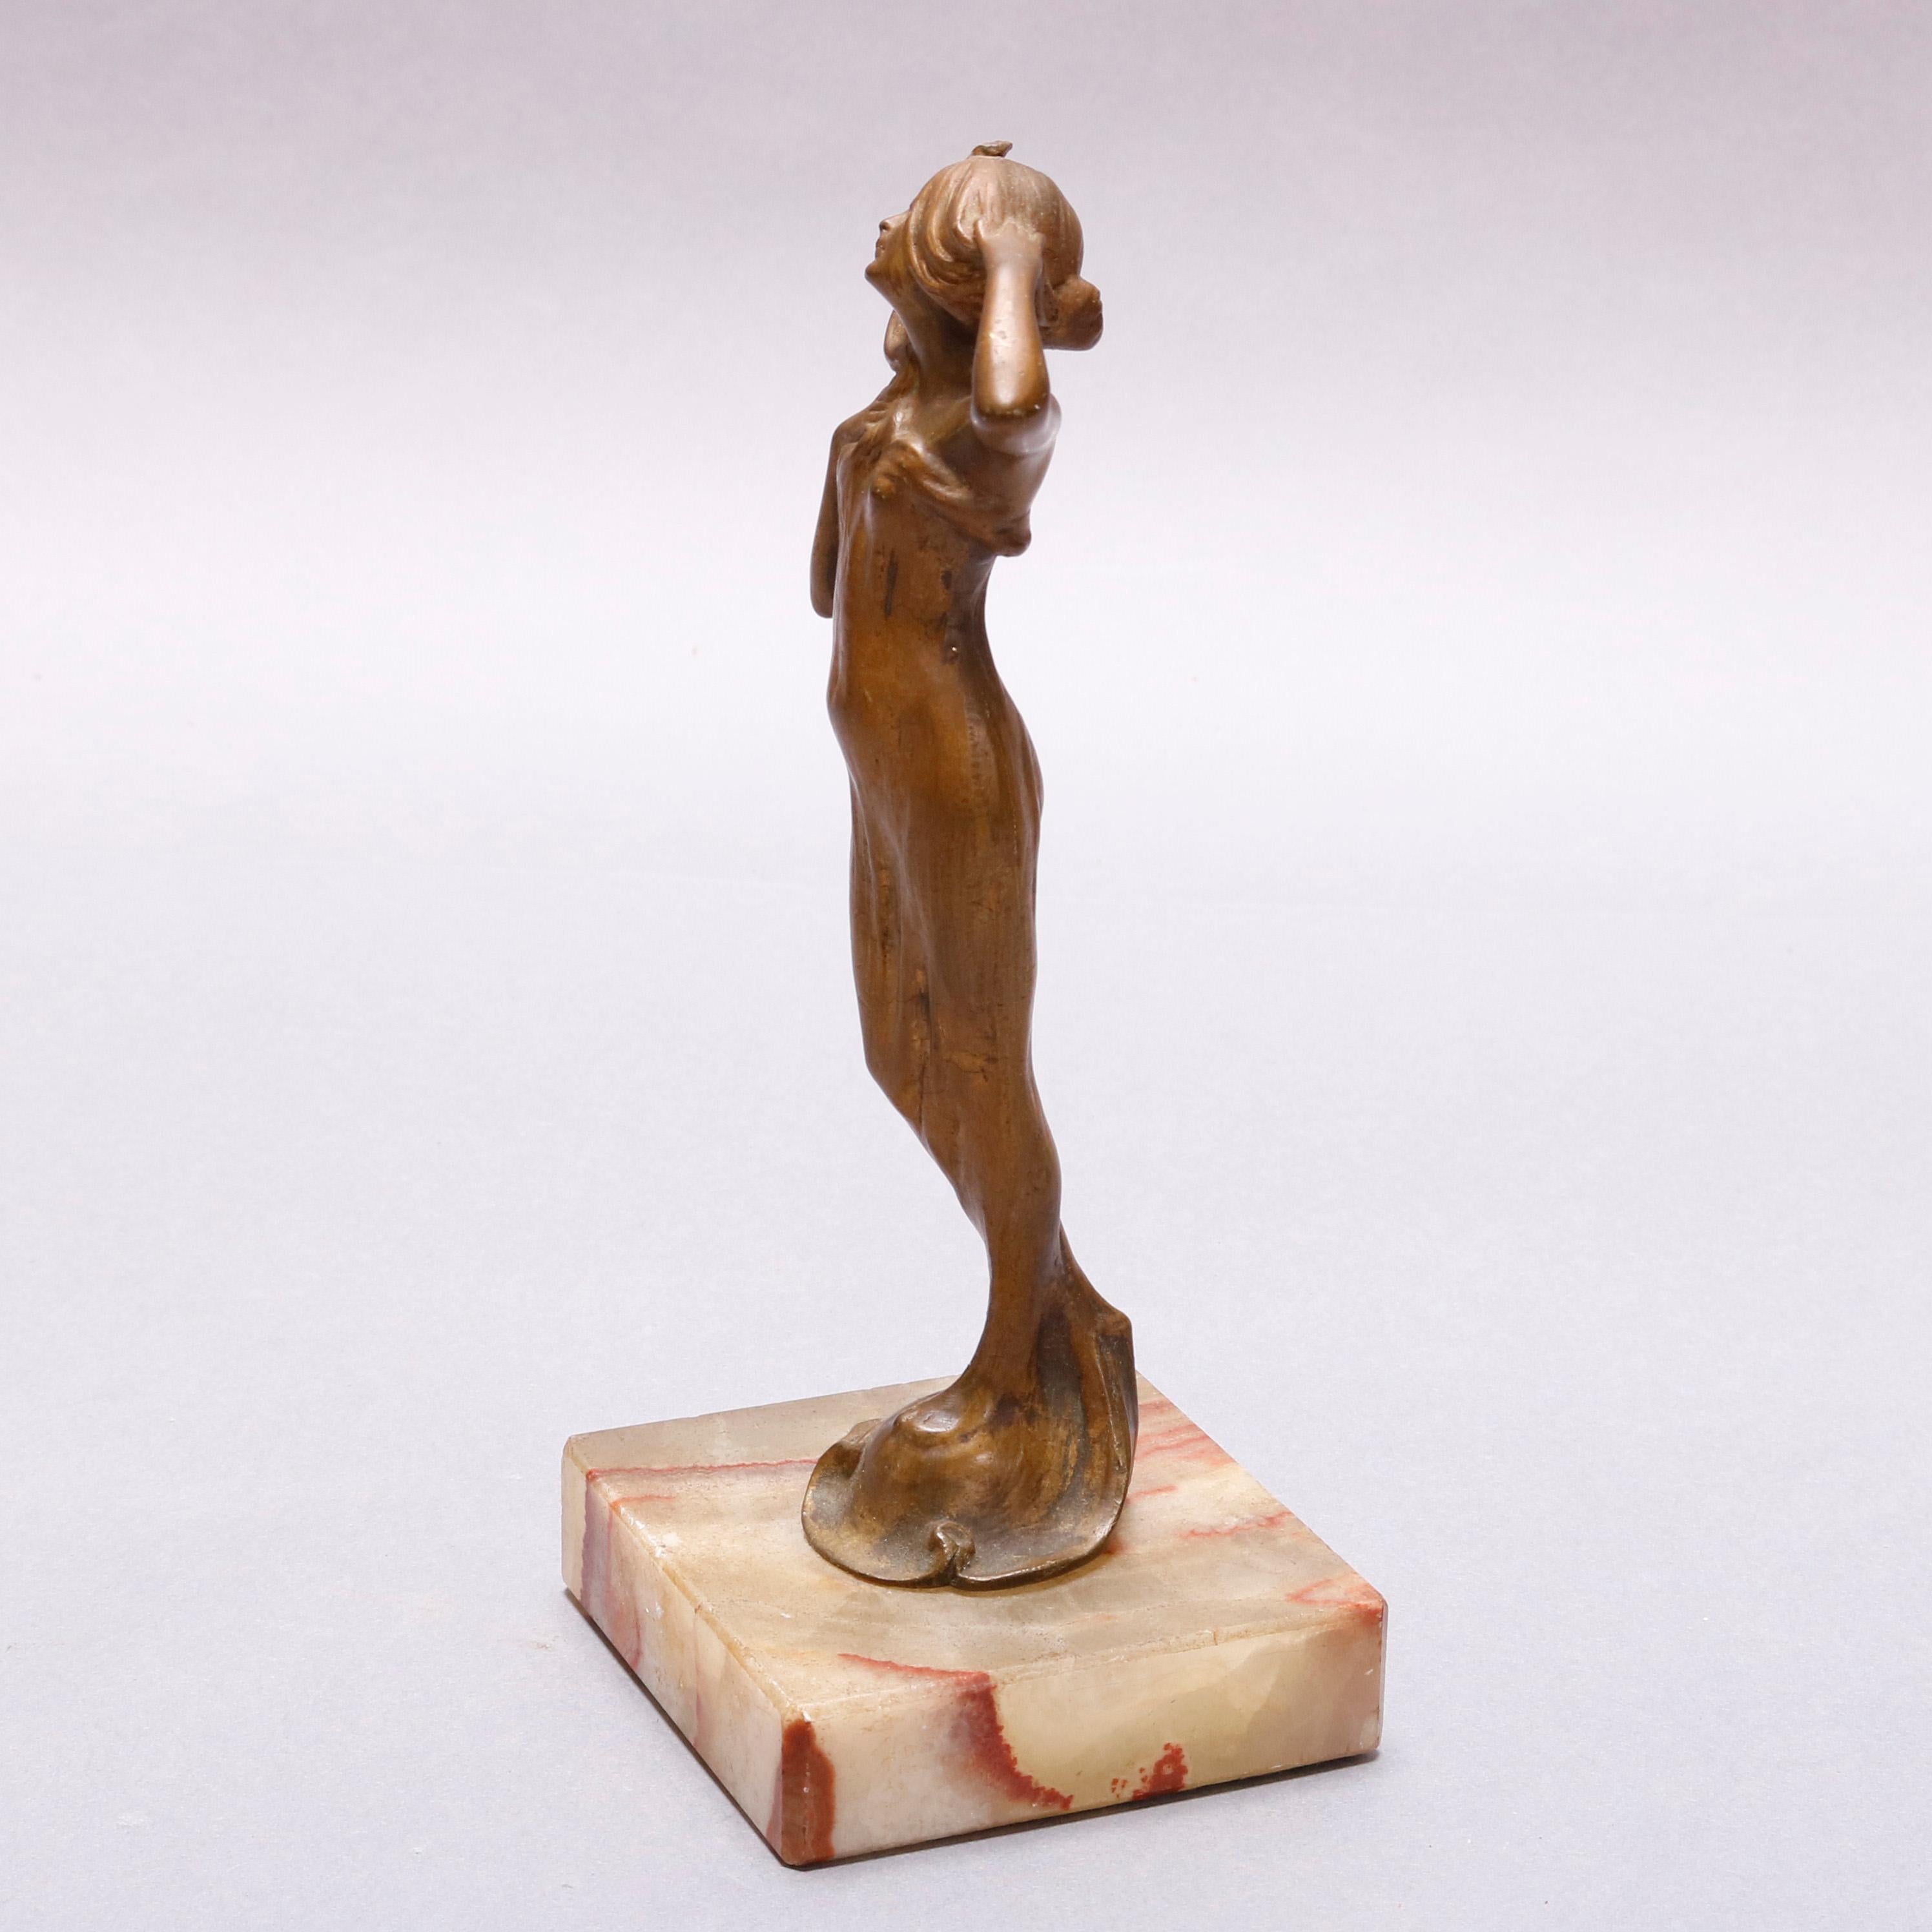 An antique Art Nouveau figural cast bronze portrait sculpture depicts young woman in fitted and flowing dress, mounted on marble base, circa 1920

Measures: 7.25